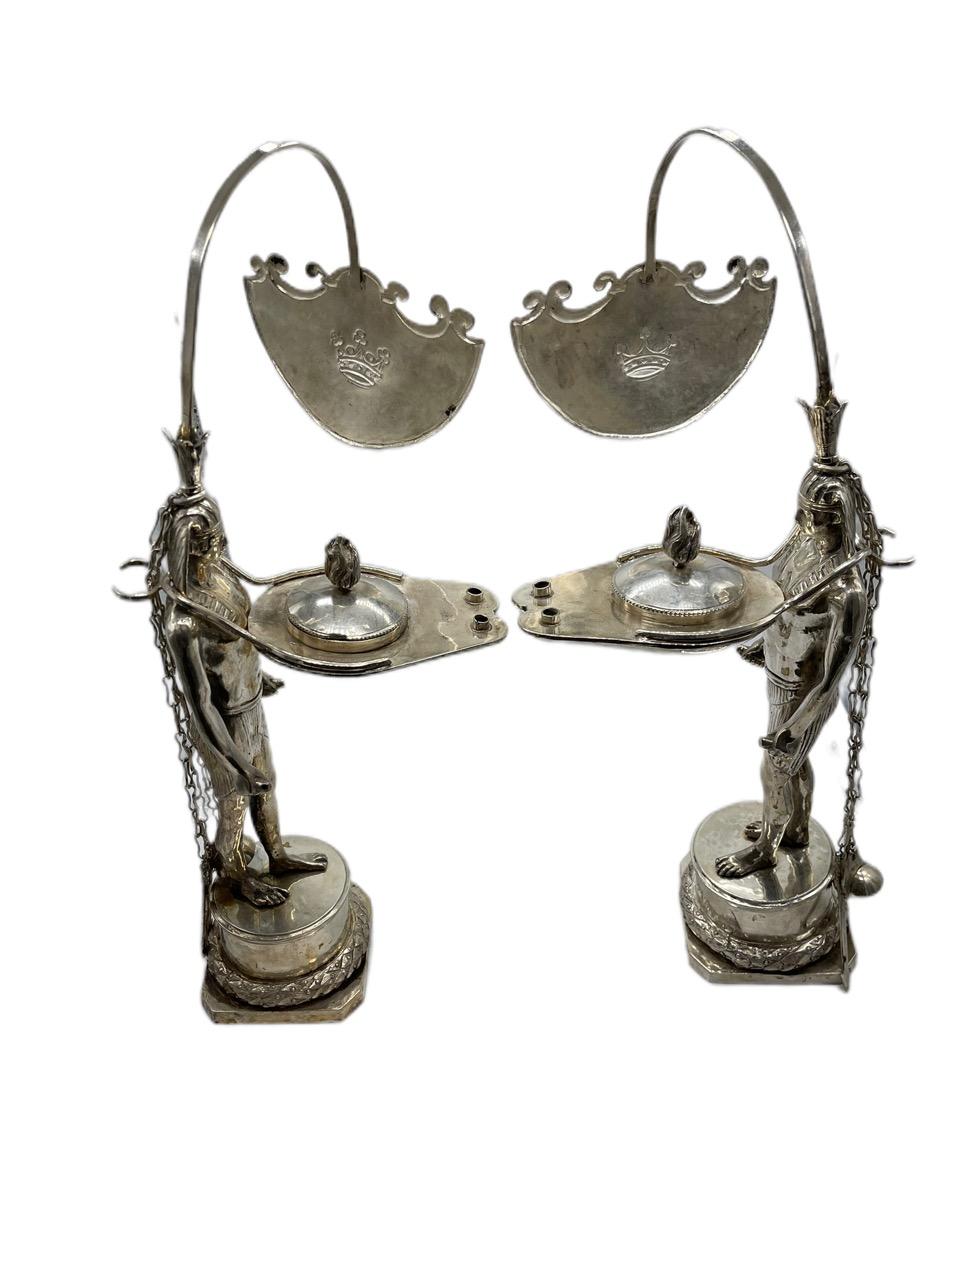 Pair of Early 19th Century Italian Antique Silver Oil Lamps by Vincenzo Belli II For Sale 4